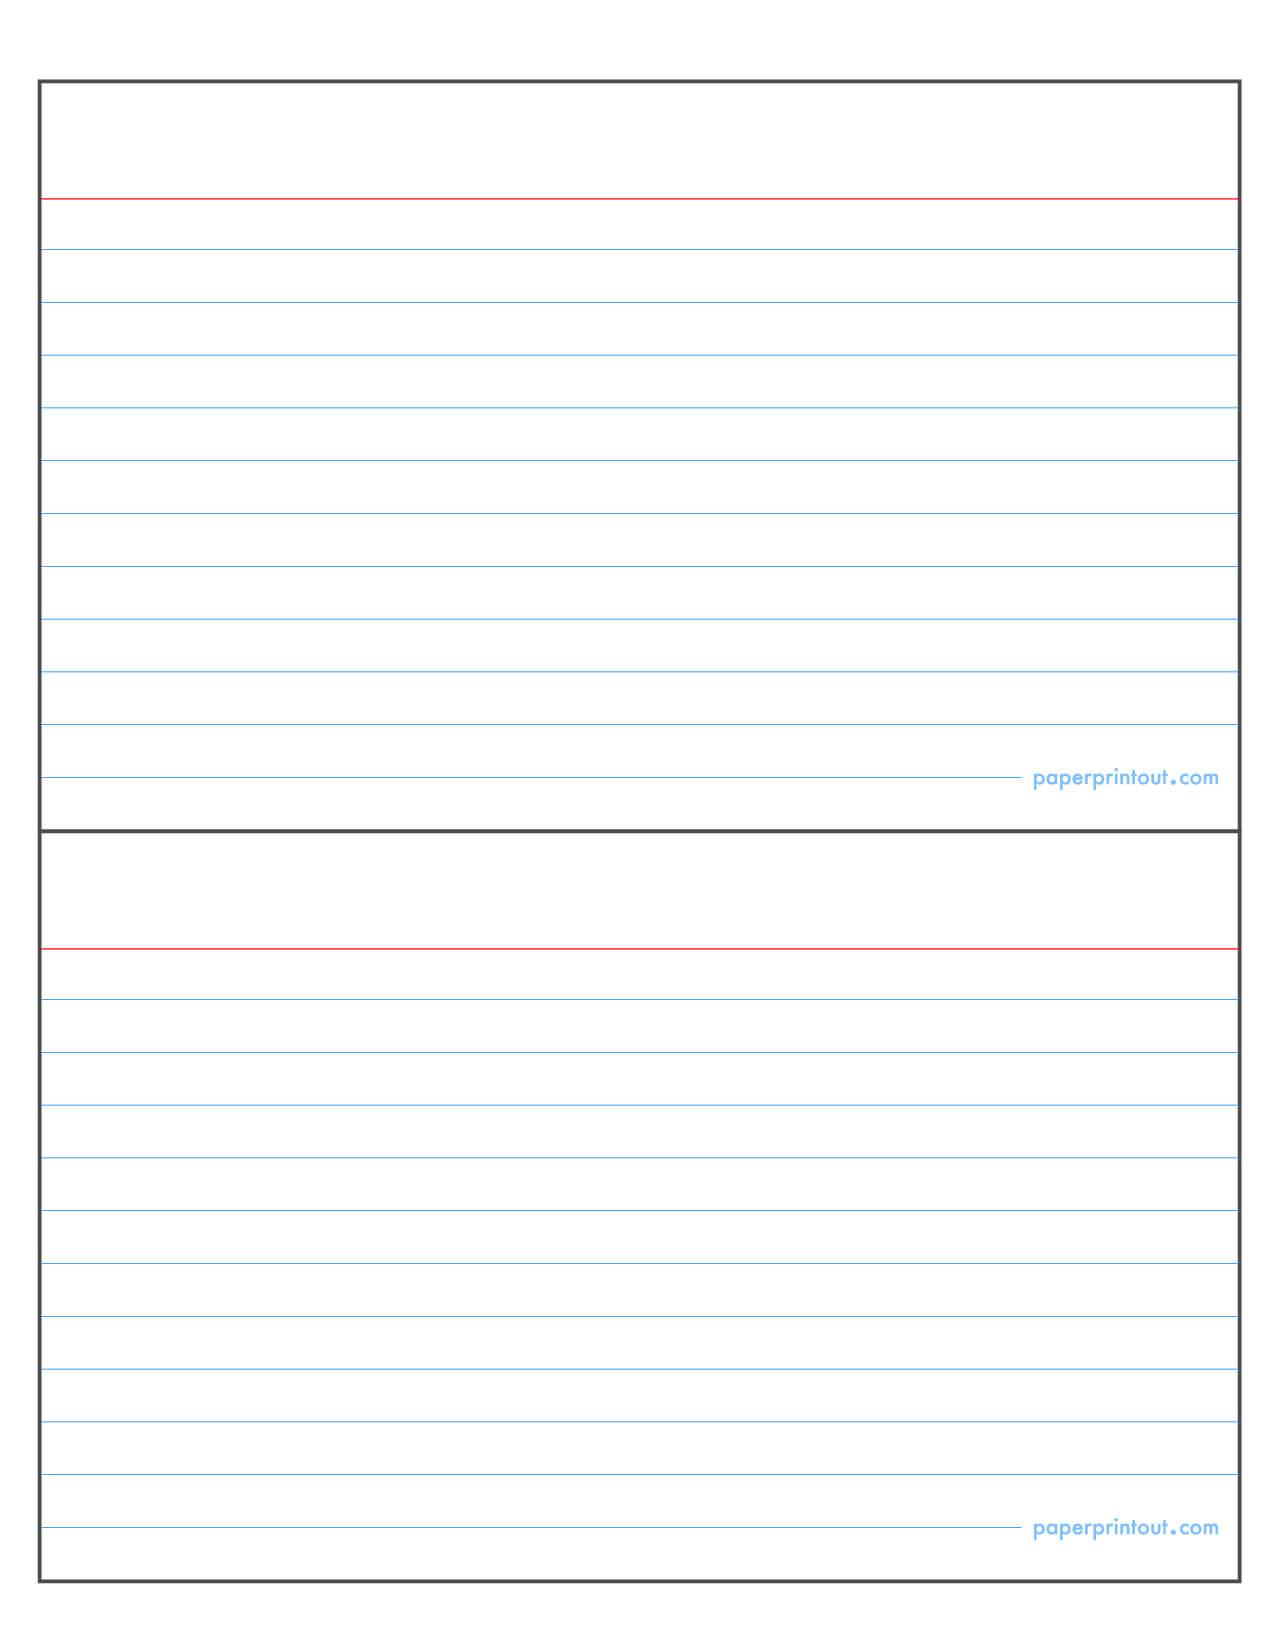 Index Card Template | E Commercewordpress For Blank Index Card Template